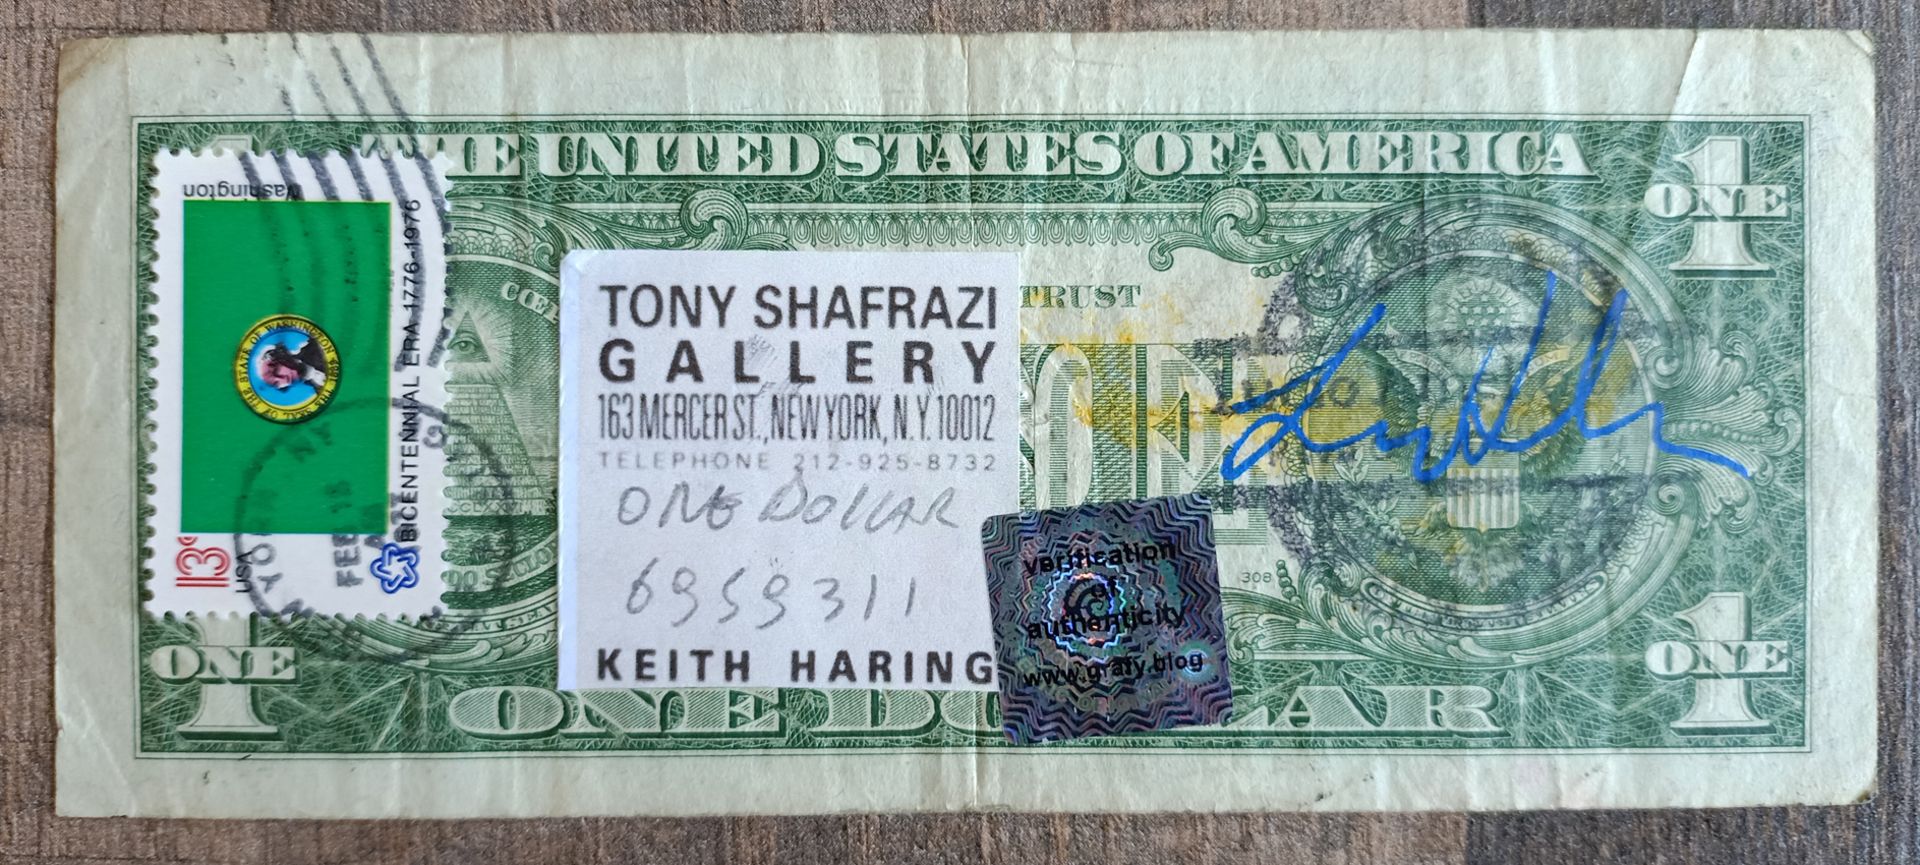 Keith Haring - Andy Warhol Dollar and Lucio Amelio Signed w/COA (#0618) - Image 8 of 10